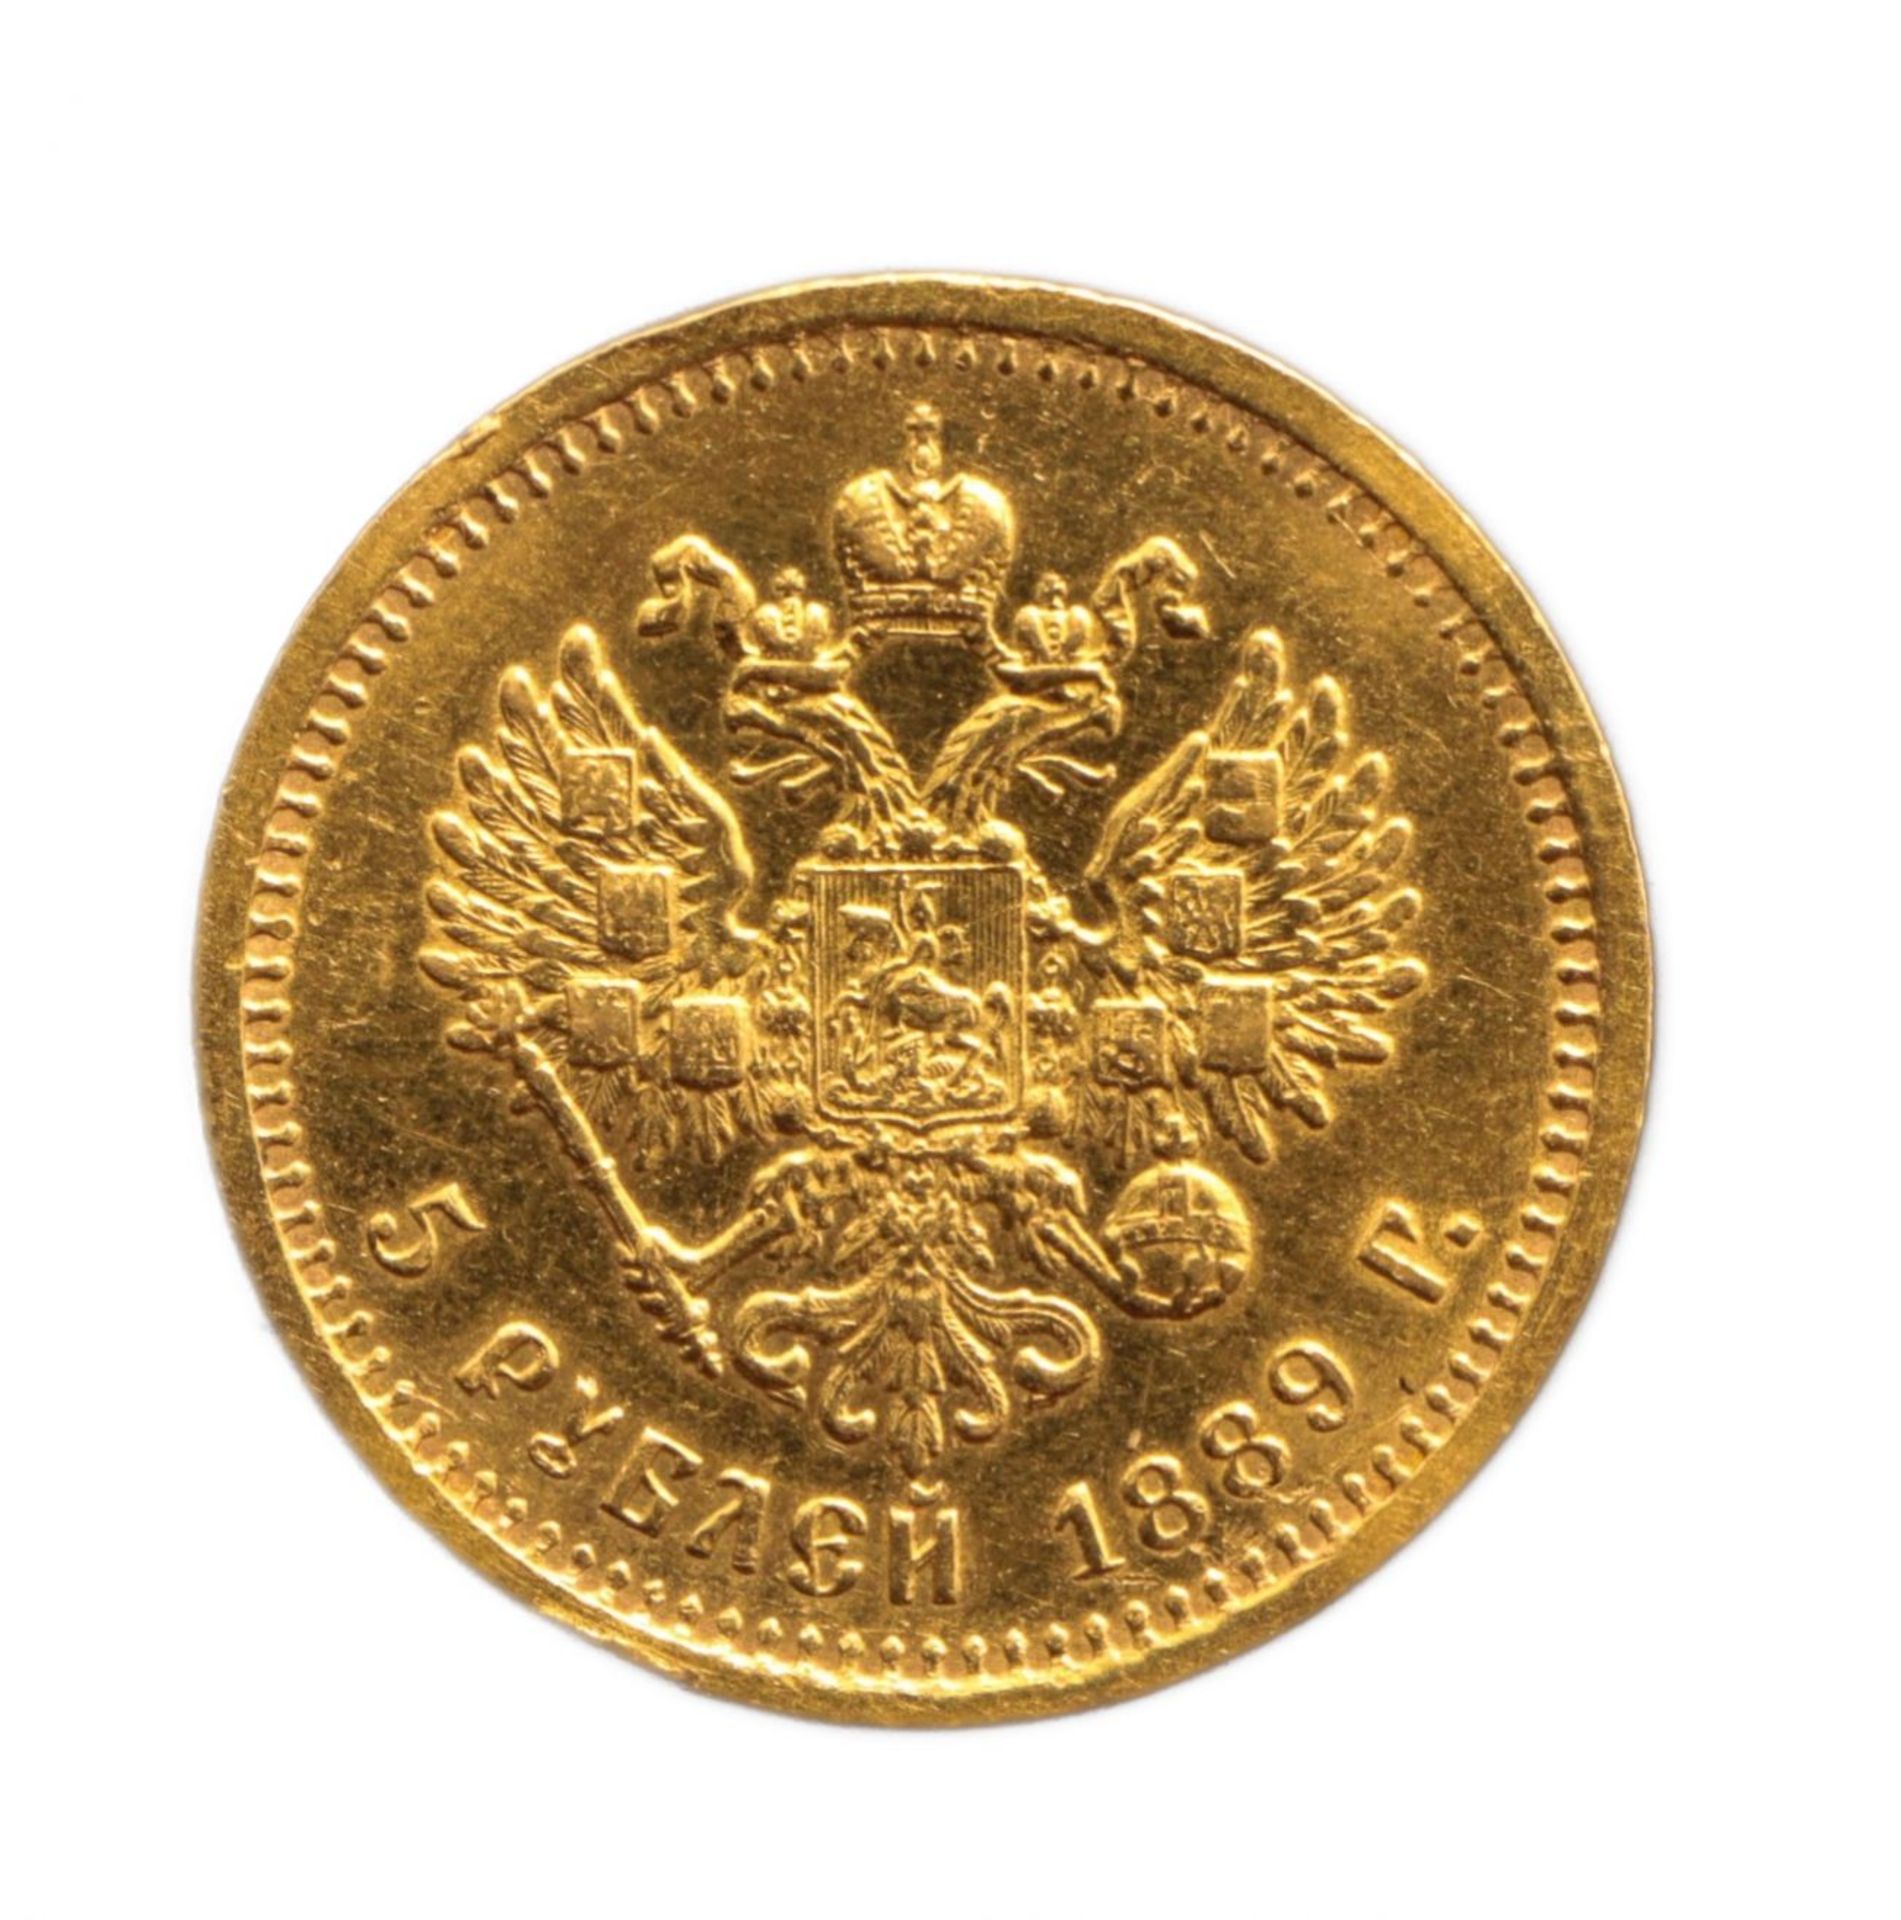 Gold coin 5 rubles of Alexander III, 1889. Russia - Image 2 of 2